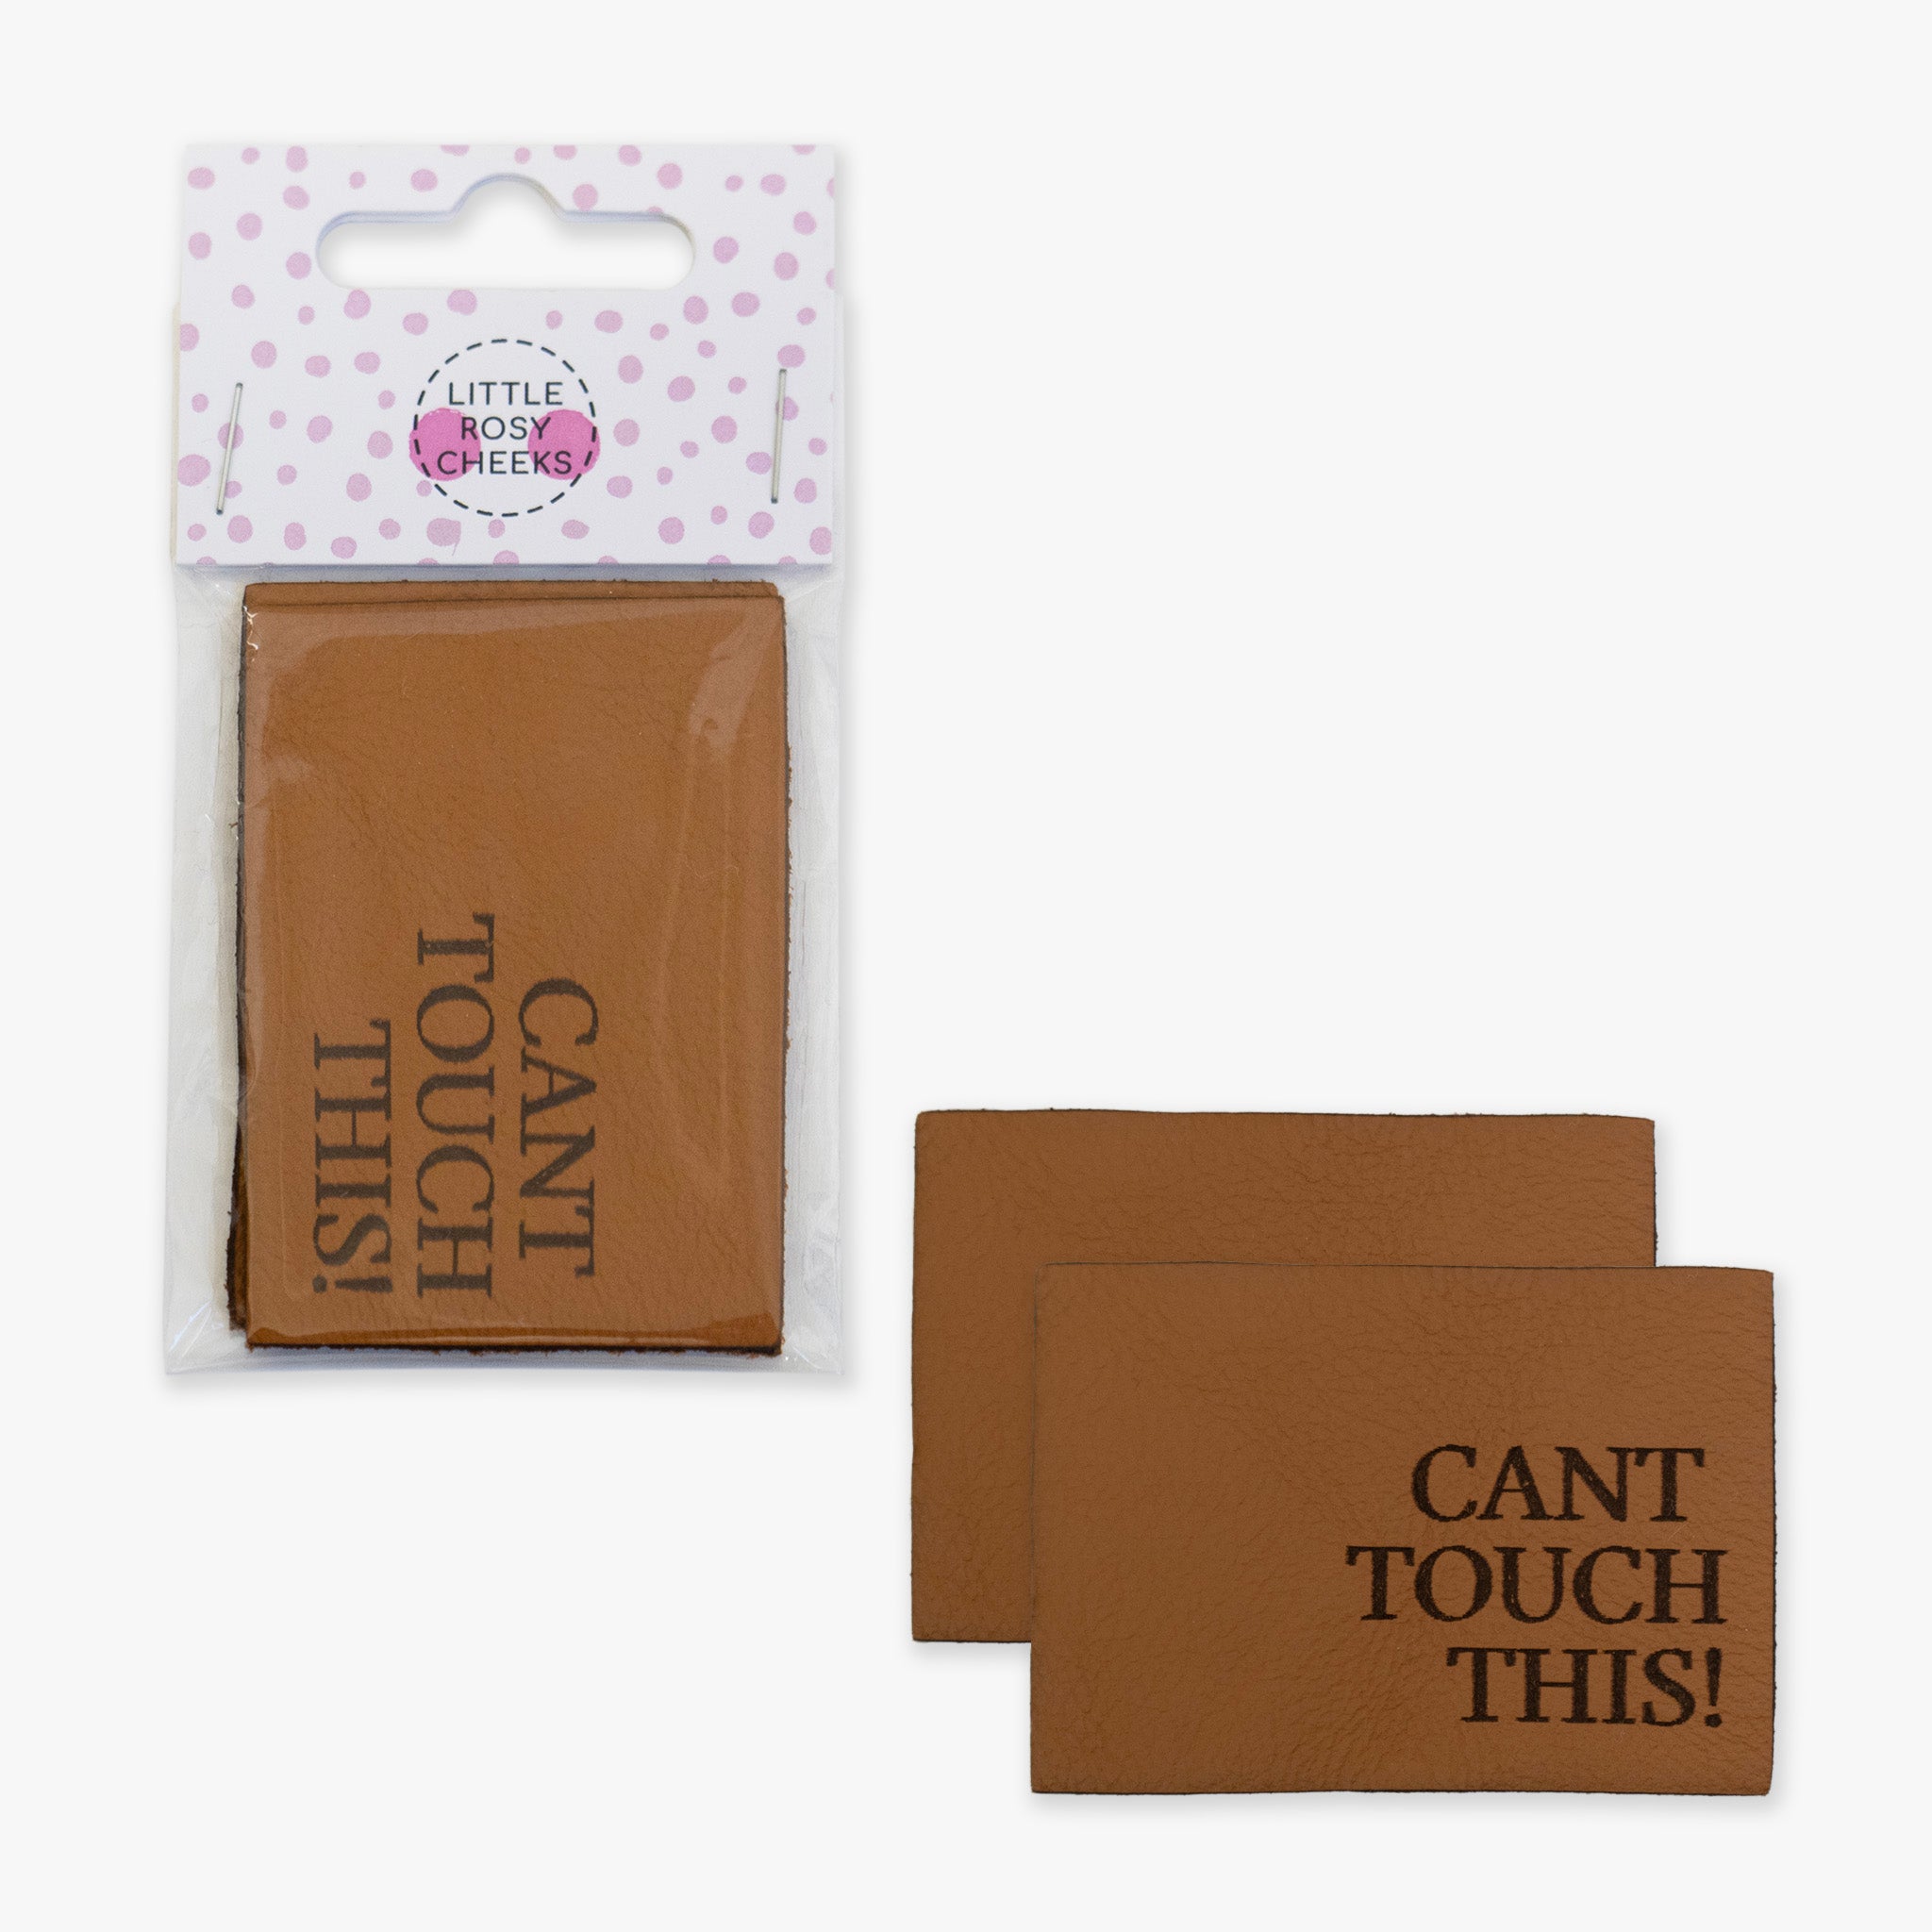 'CAN'T TOUCH THIS!' Pack of 2 Leather Jeans Labels